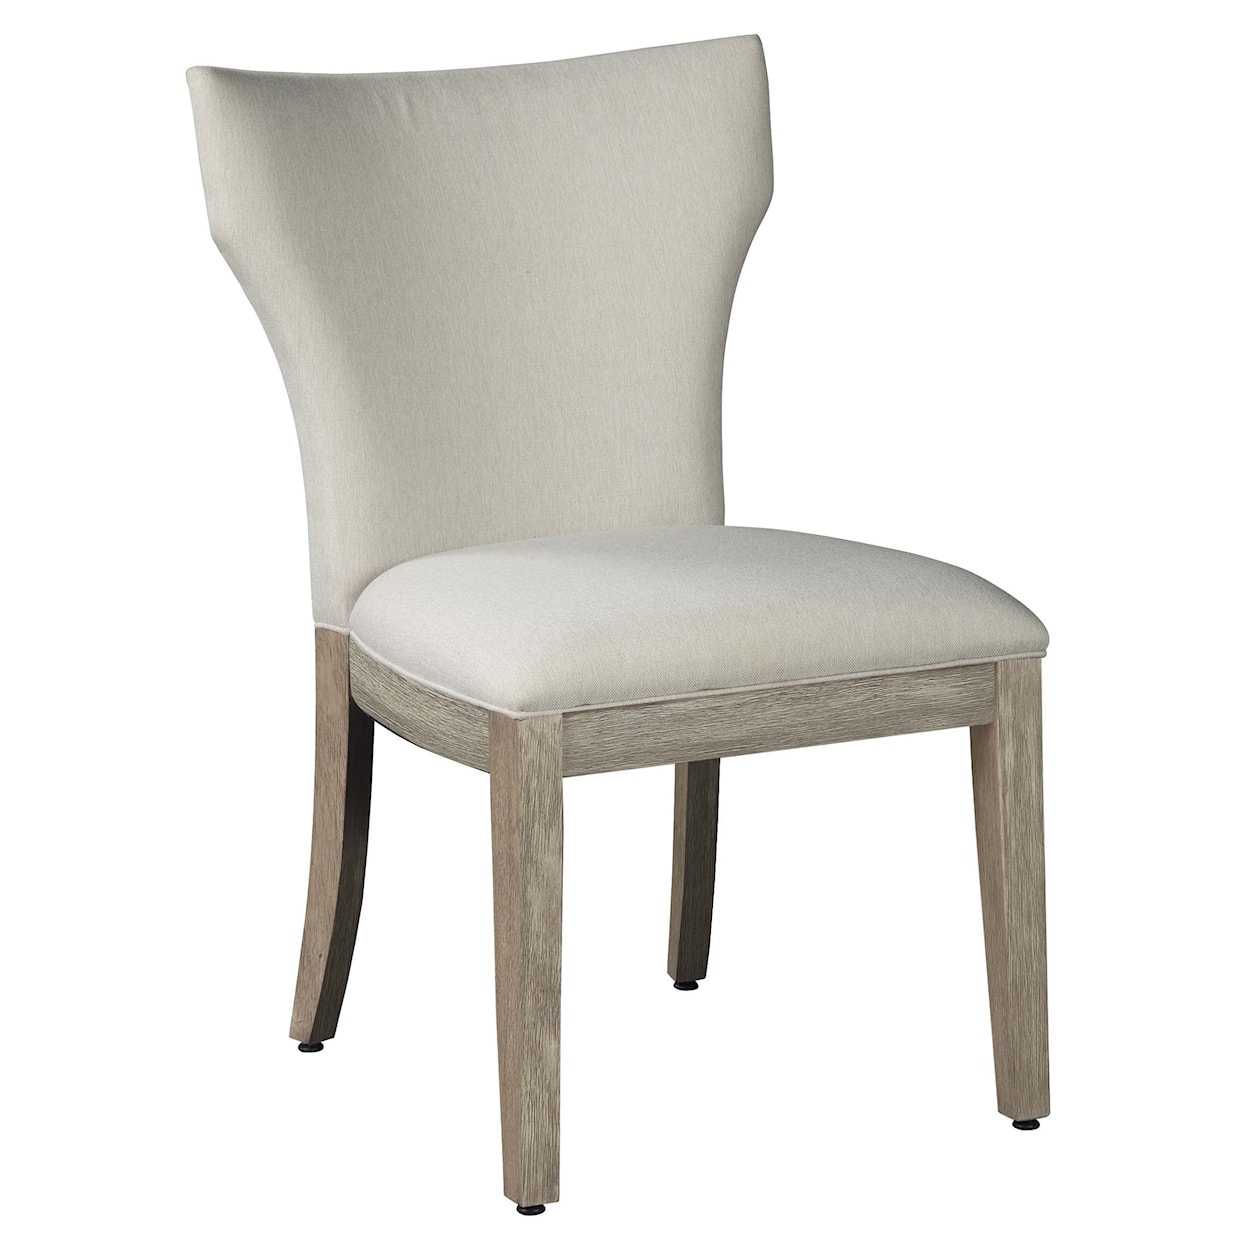 Hekman Bedford Park Upholstered Dining Side Chair